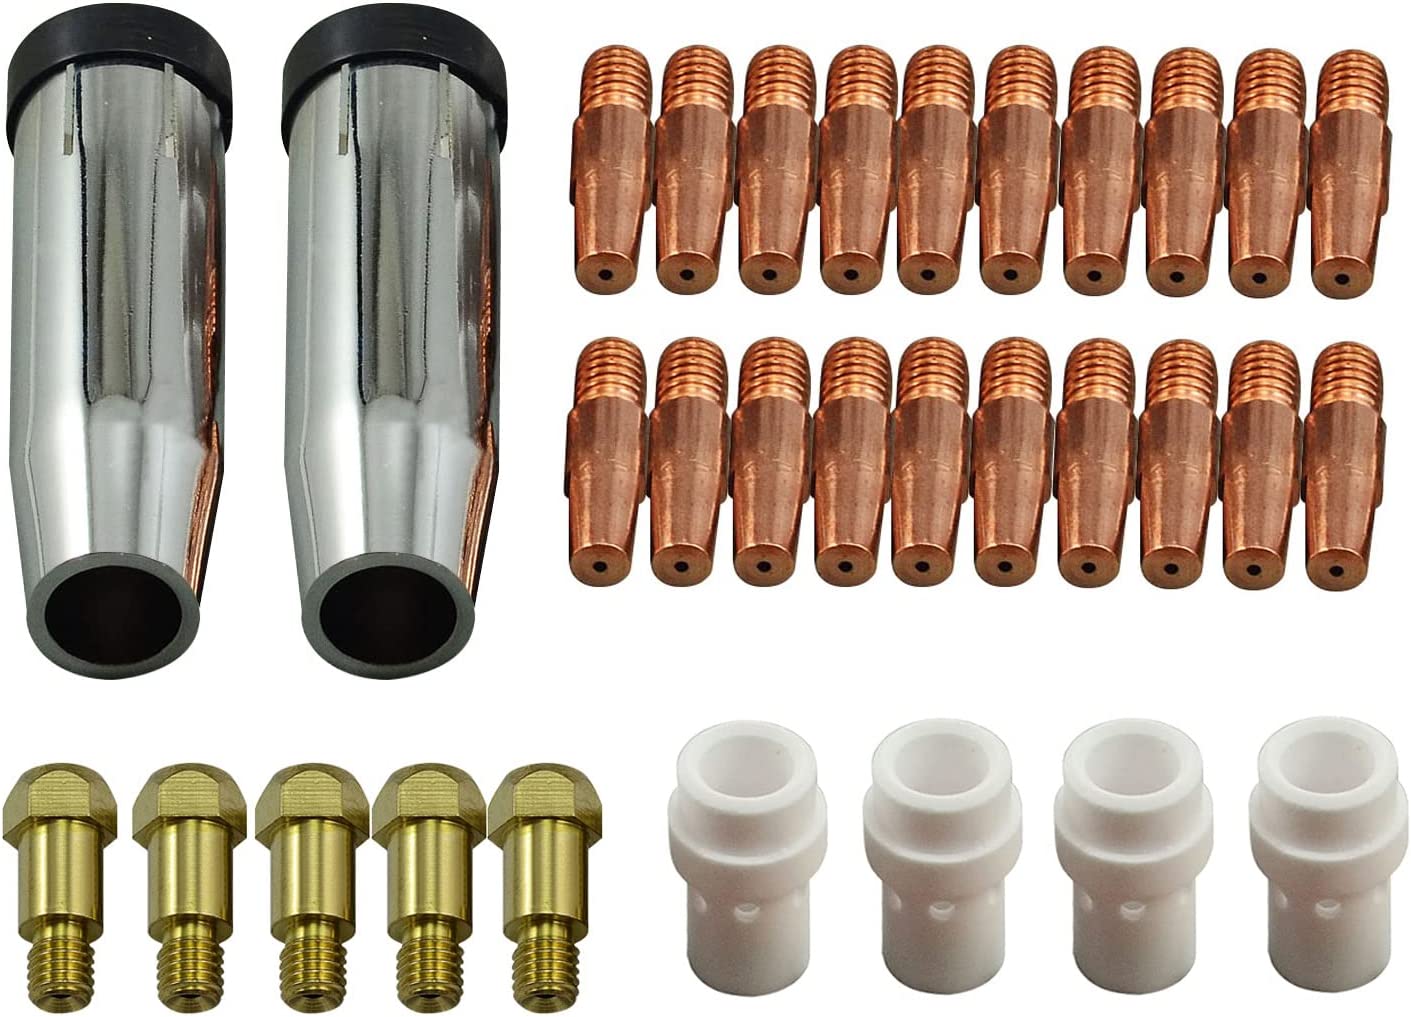 RIVERWELD 36KD MB36 Contact Nozzle Gas Nozzle Conical Contact Nozzles 0.9 mm Holder Distributor Accessories Consumables Pack of 31